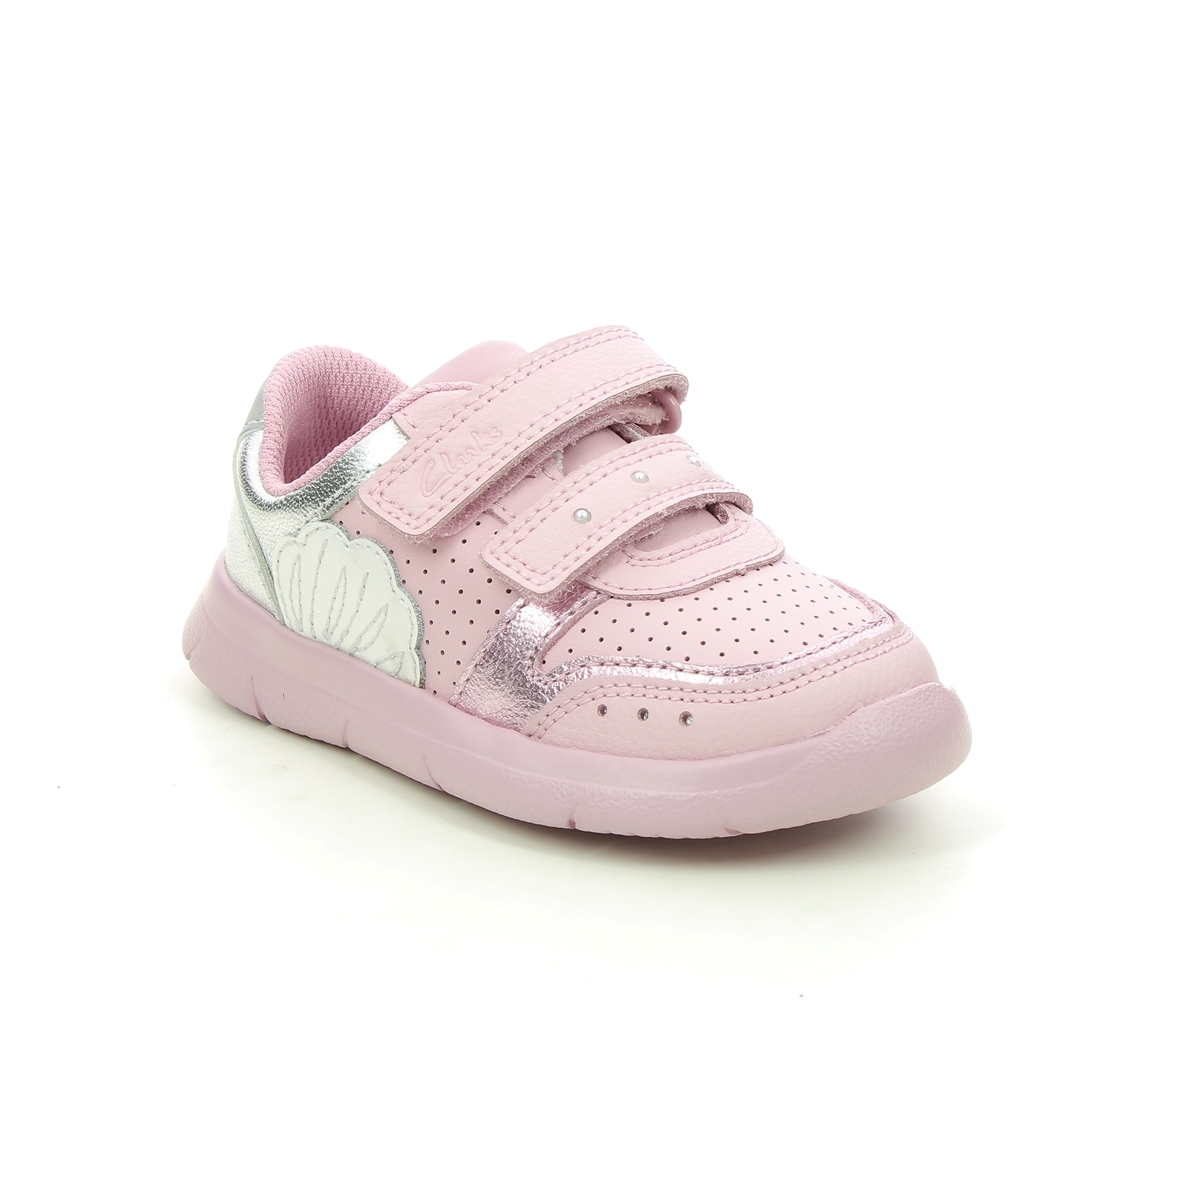 Clarks Ath Shell T Pink Leather Kids Toddler Girls Trainers 588097G In Size 6 In Plain Pink Leather G Width Fitting For kids